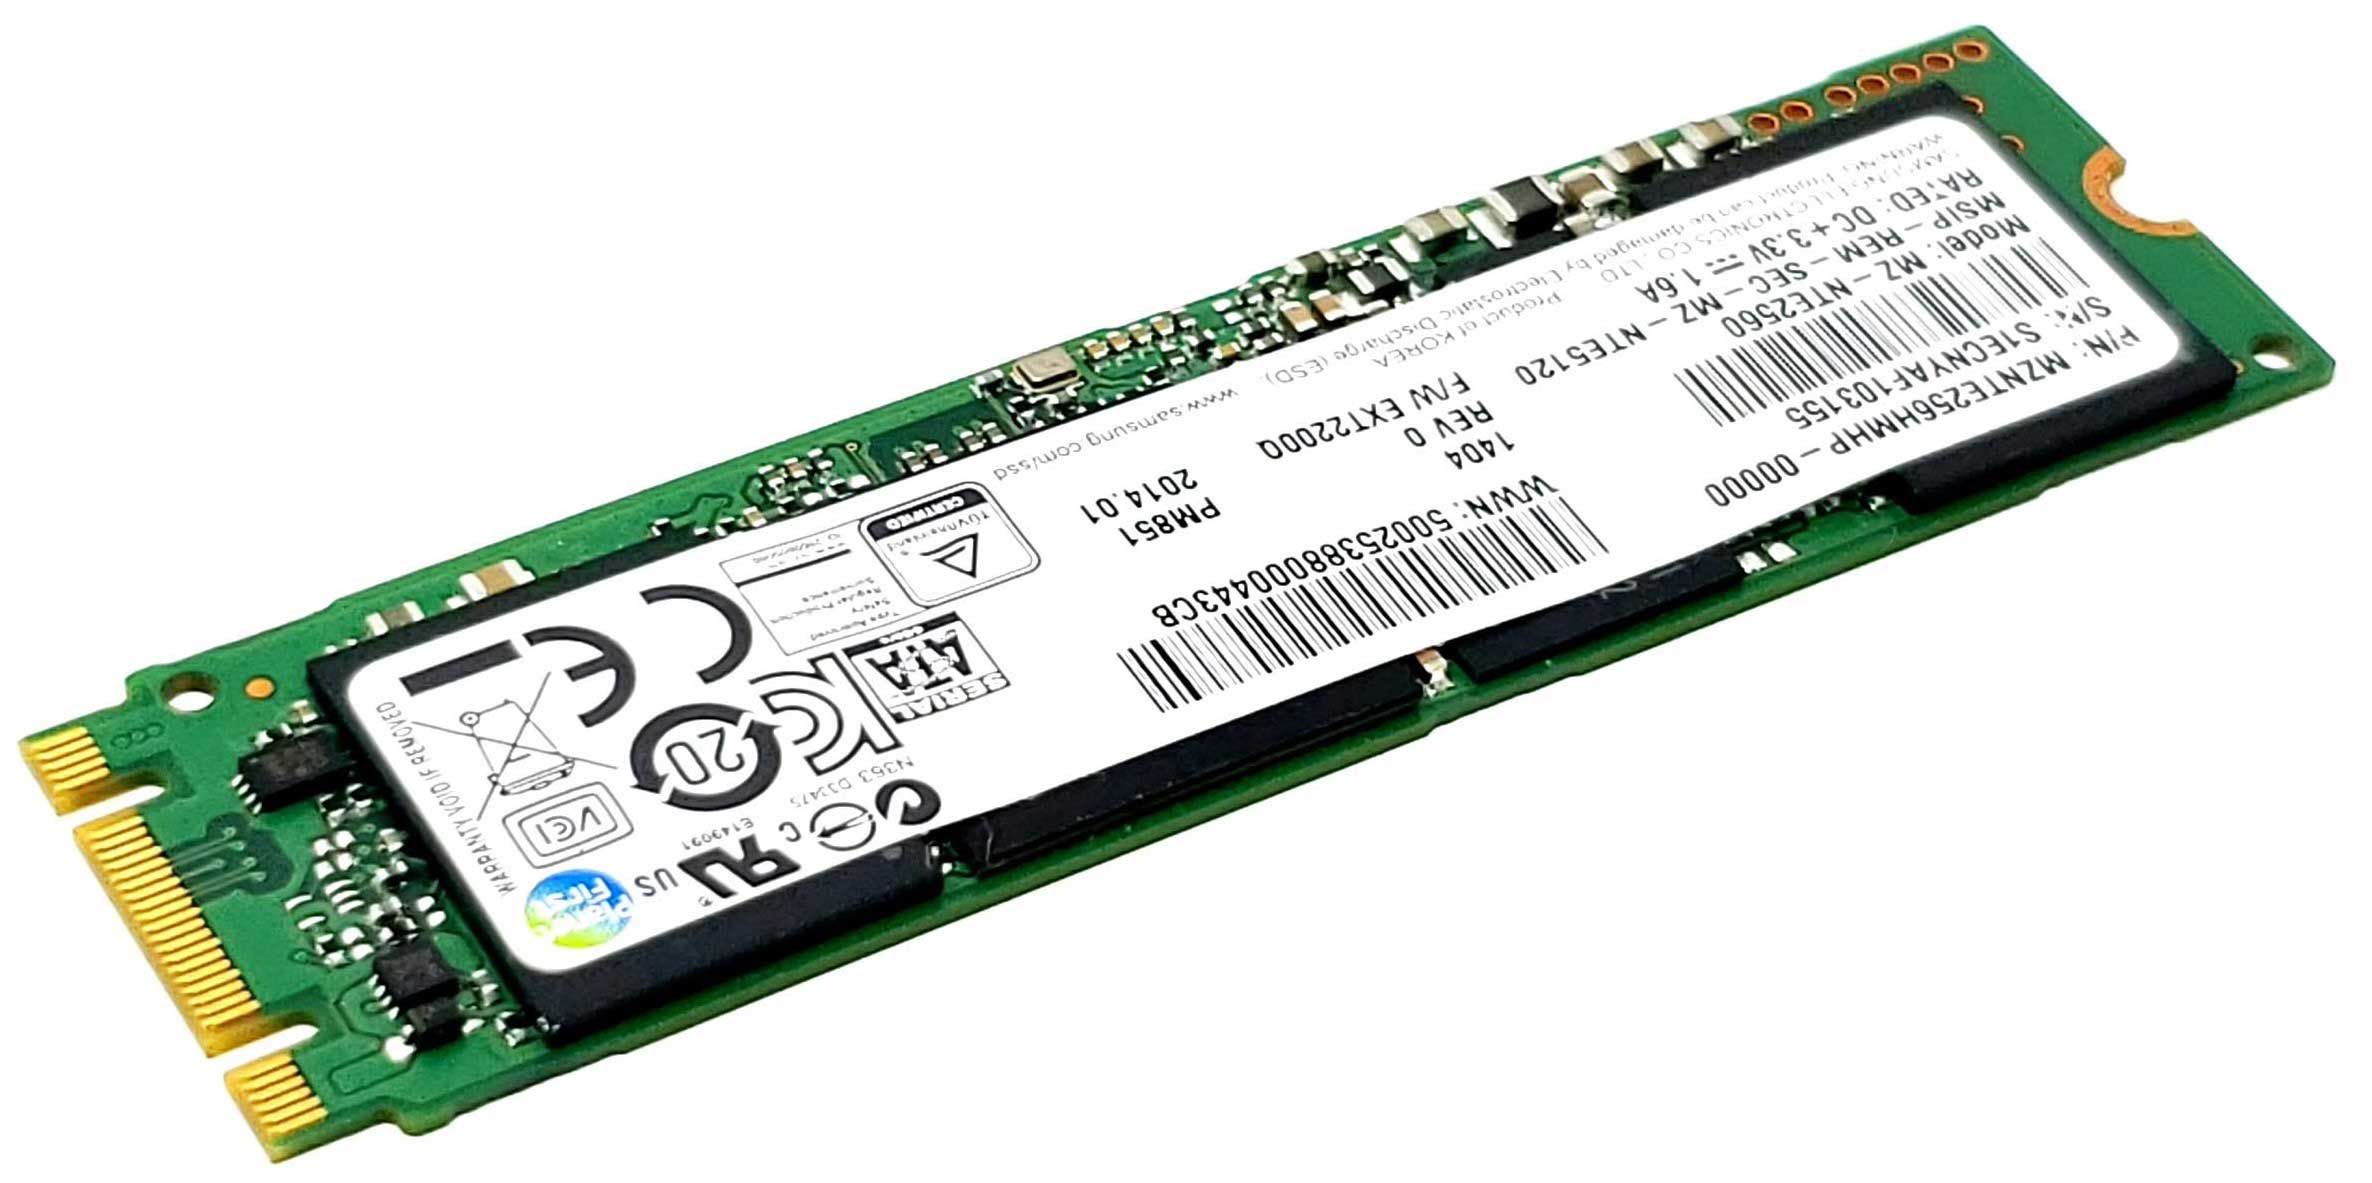 Toshiba THNSNK256GVN8 - 256GB M.2 2280 SATA III NGFF Solid State SSD